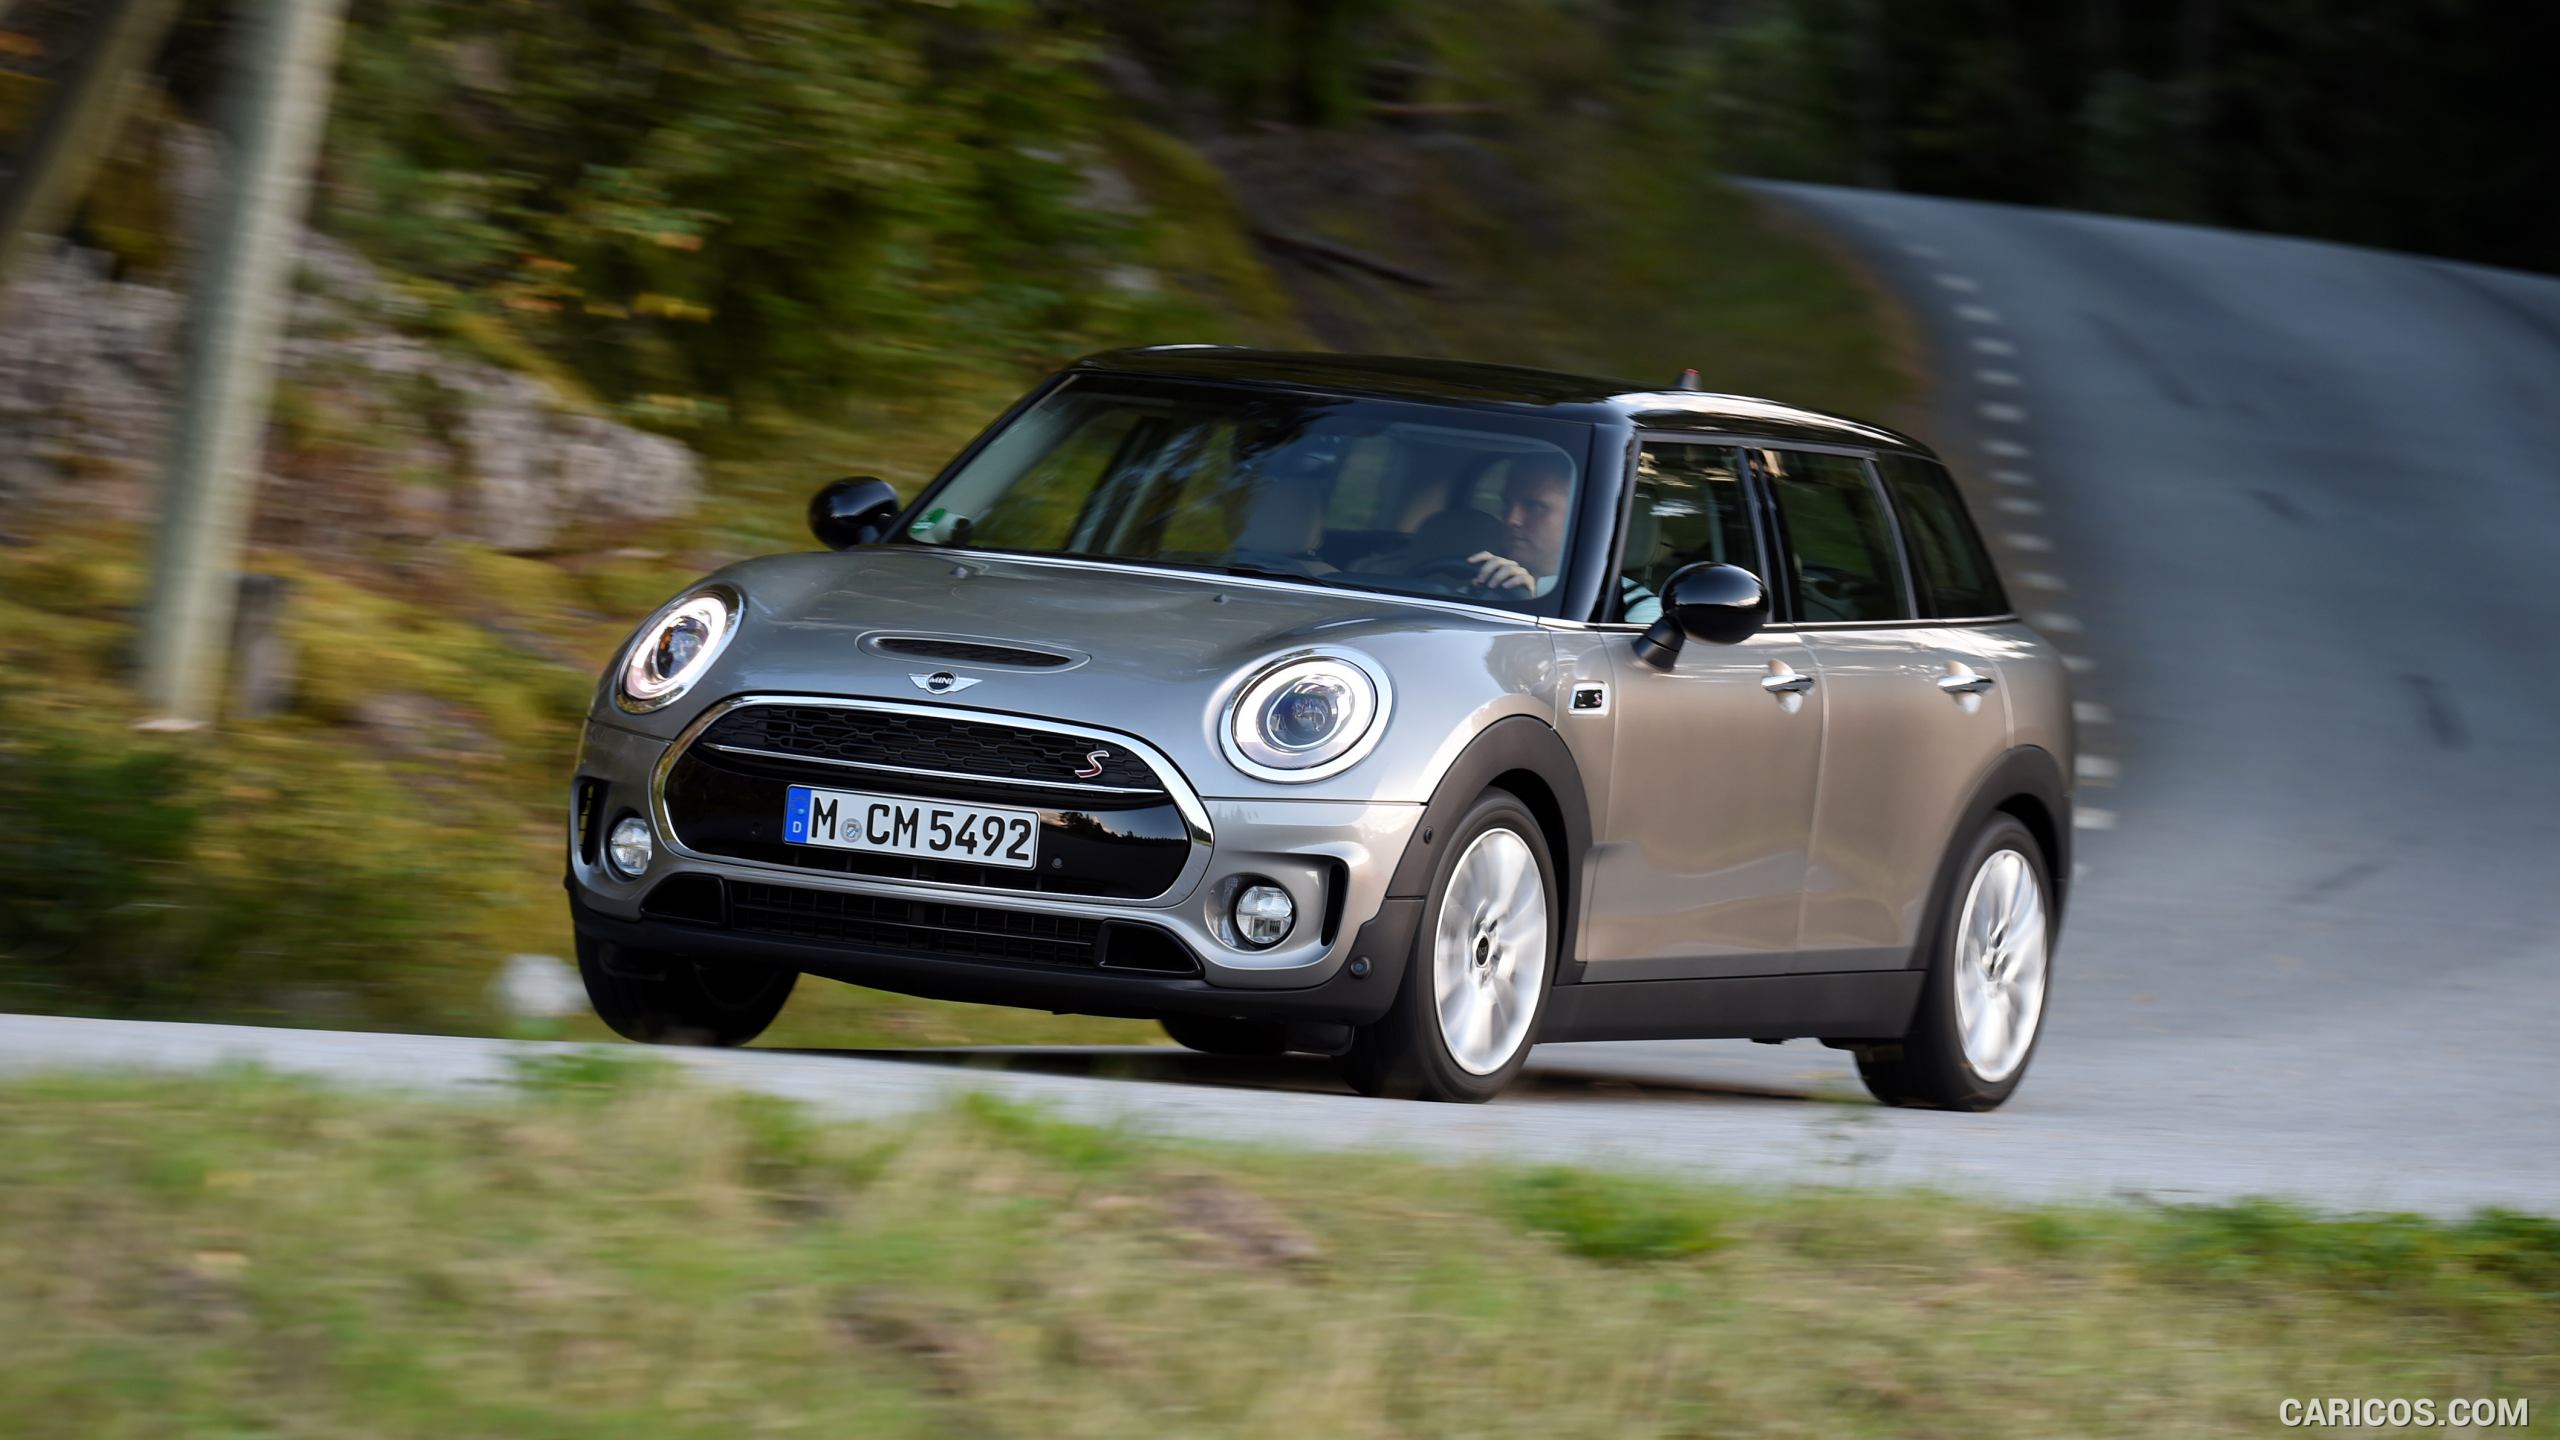 2016 MINI Cooper S Clubman in Metallic Melting Silver - Front, #134 of 380